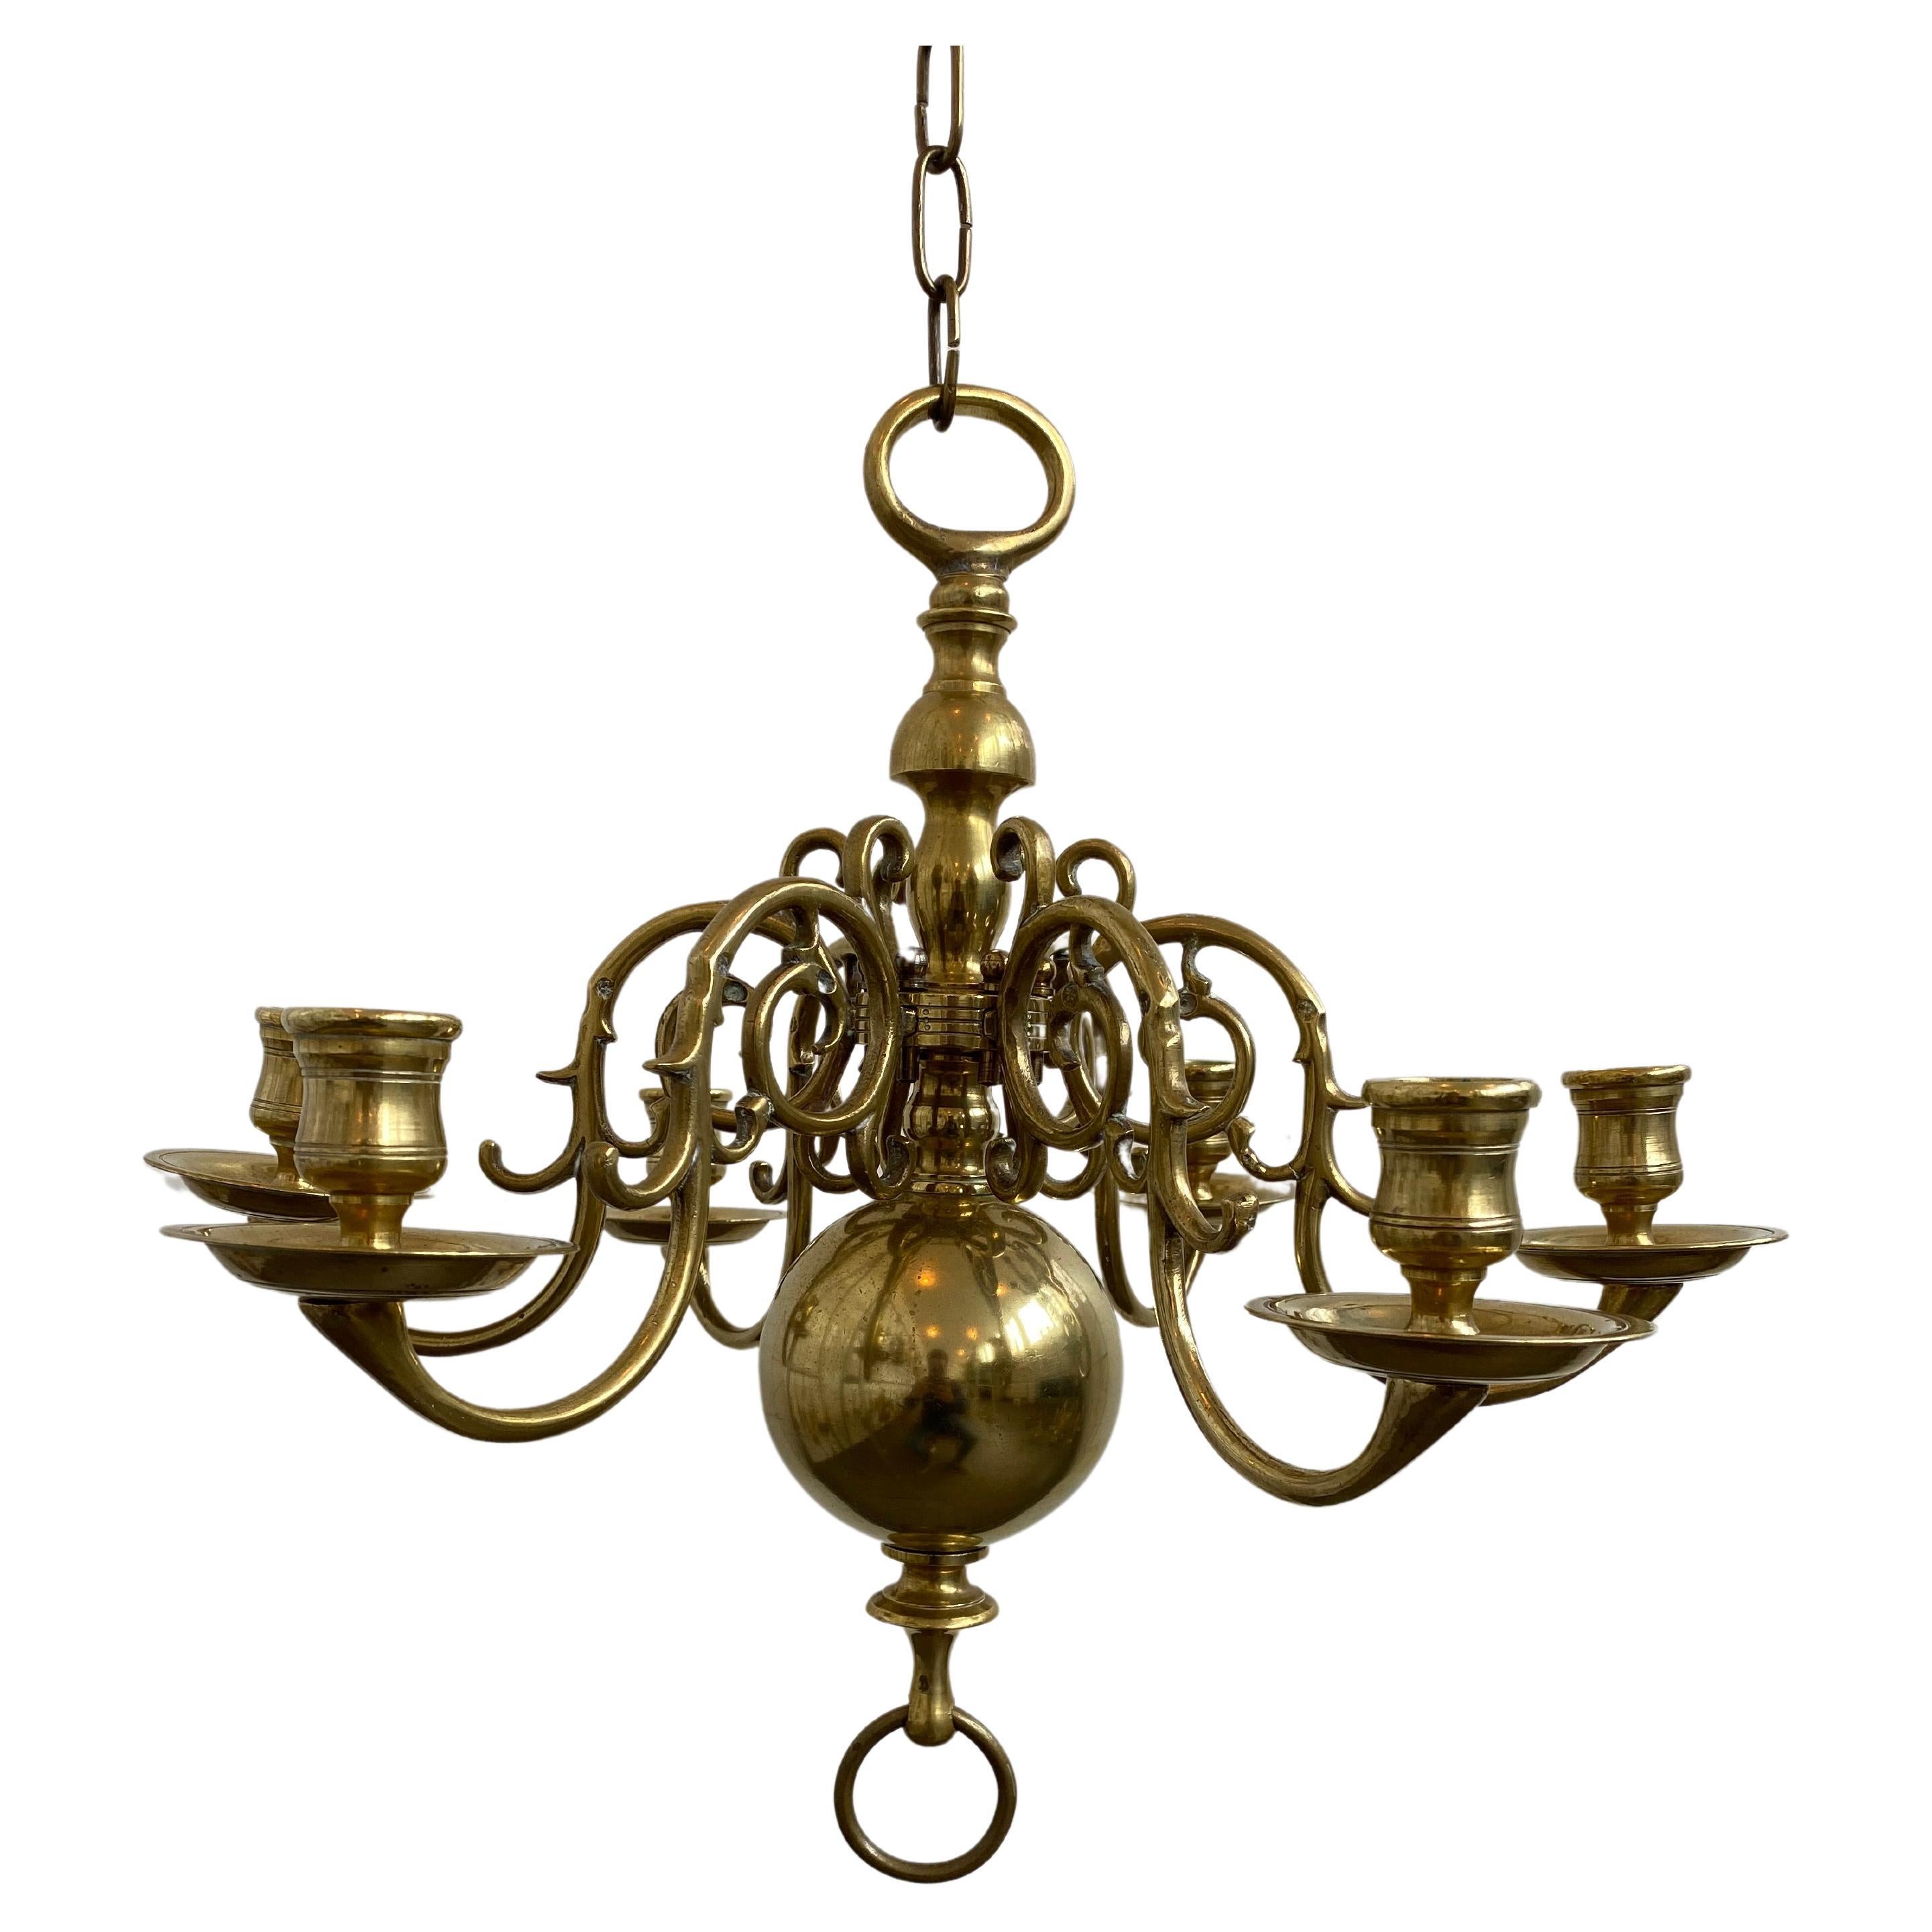 Vintage 1 Tier 17th Century Candle Dutch Brass Chandelier 6 Lights H40xW45 For Sale